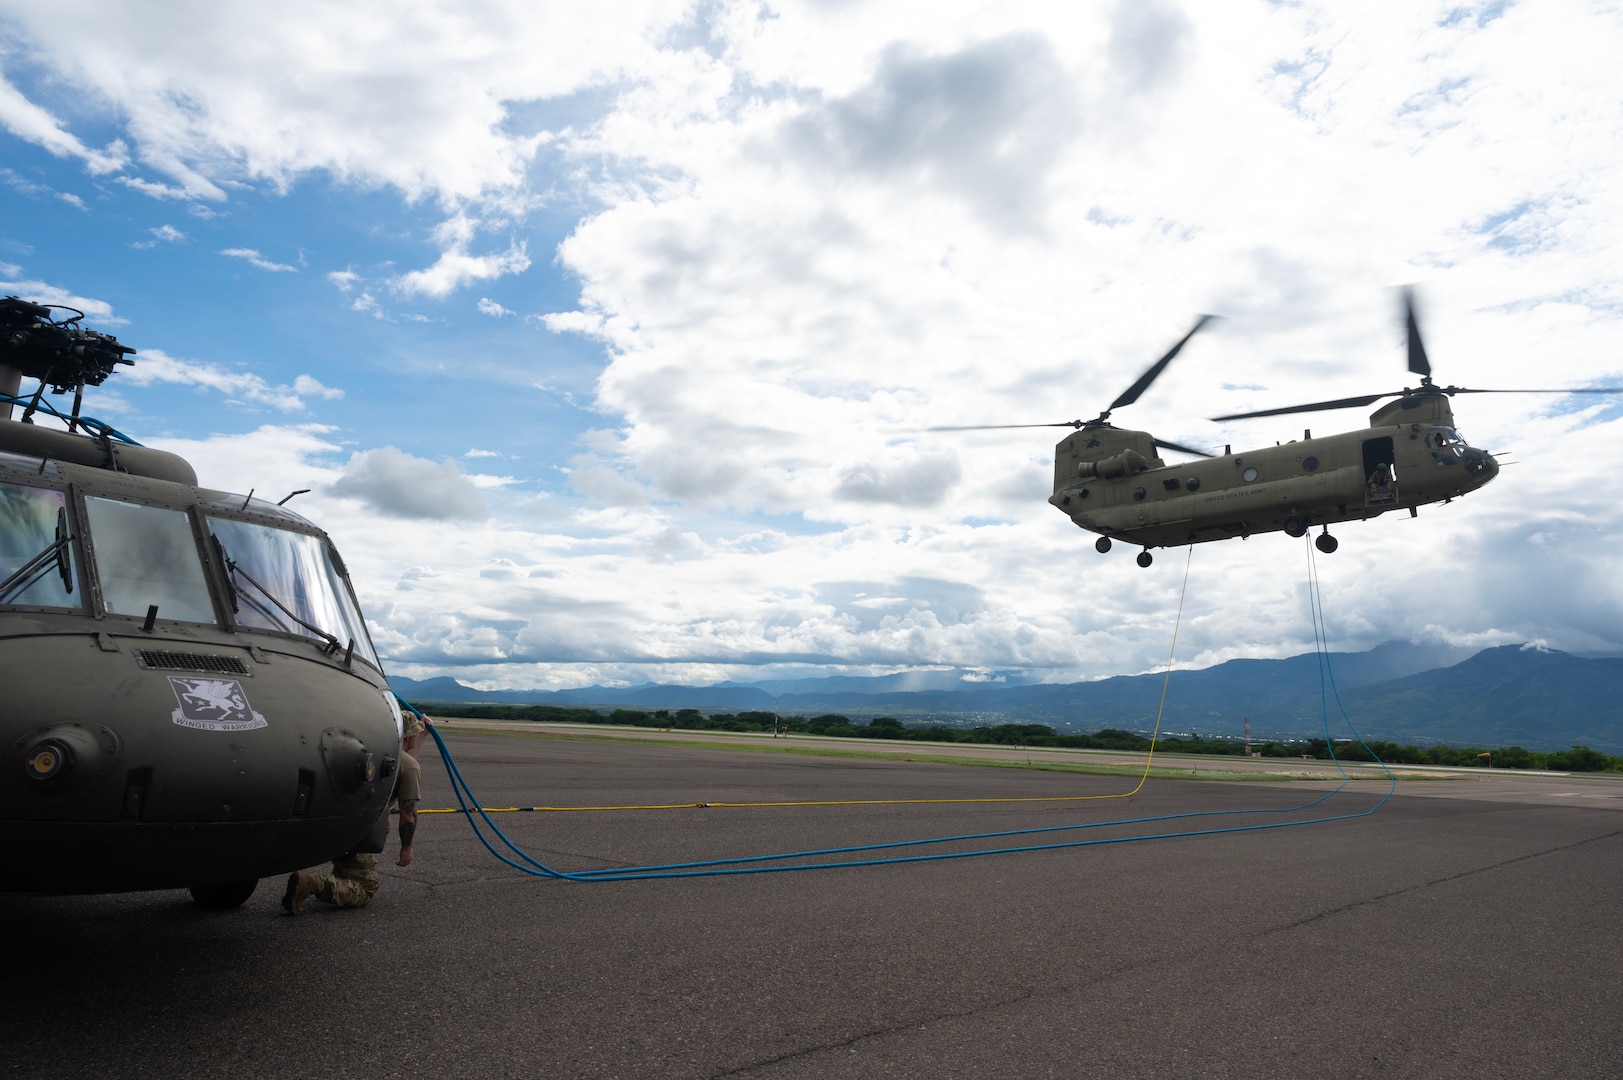 The training further built confidence between the maintainers and aviators supporting U.S. Southern Command, and highlights one of JTF-Bravo's means of aerial recovery of inoperative and lightly and heavily damaged helicopters using medium-lift and heavy-lift helicopters as the recovery vehicles.